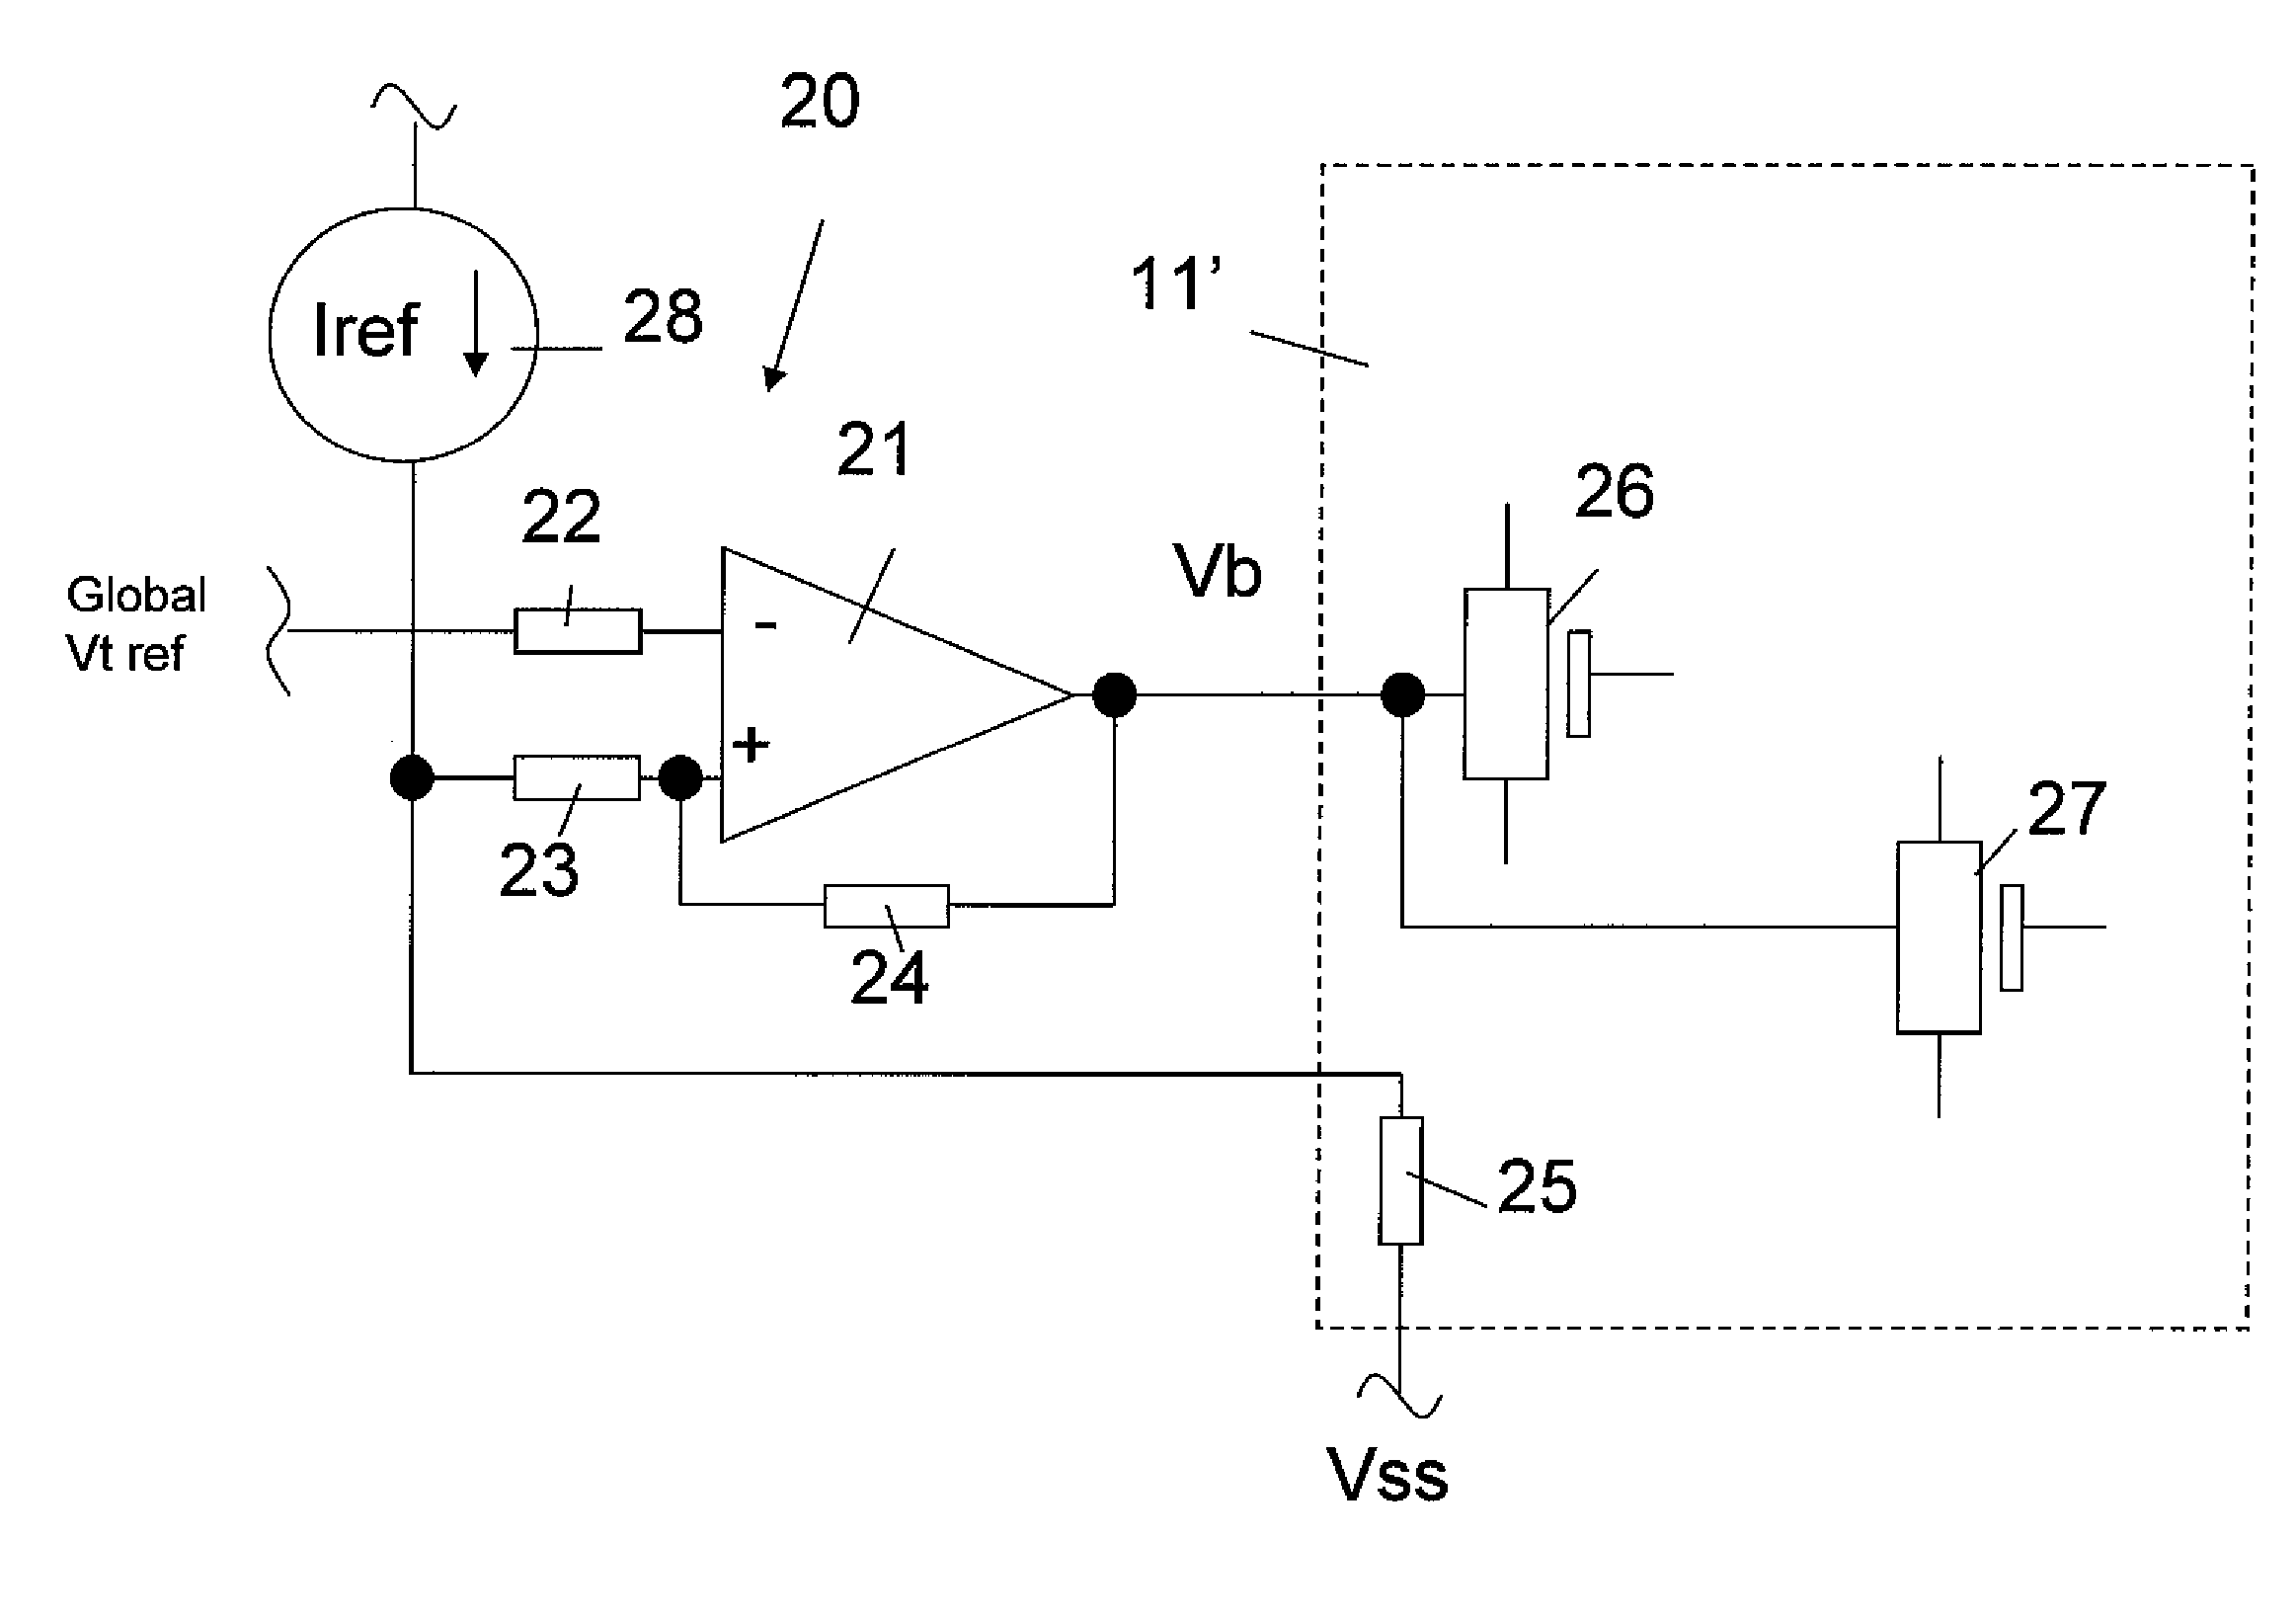 Circuit to compensate threshold voltage variation due to process variation